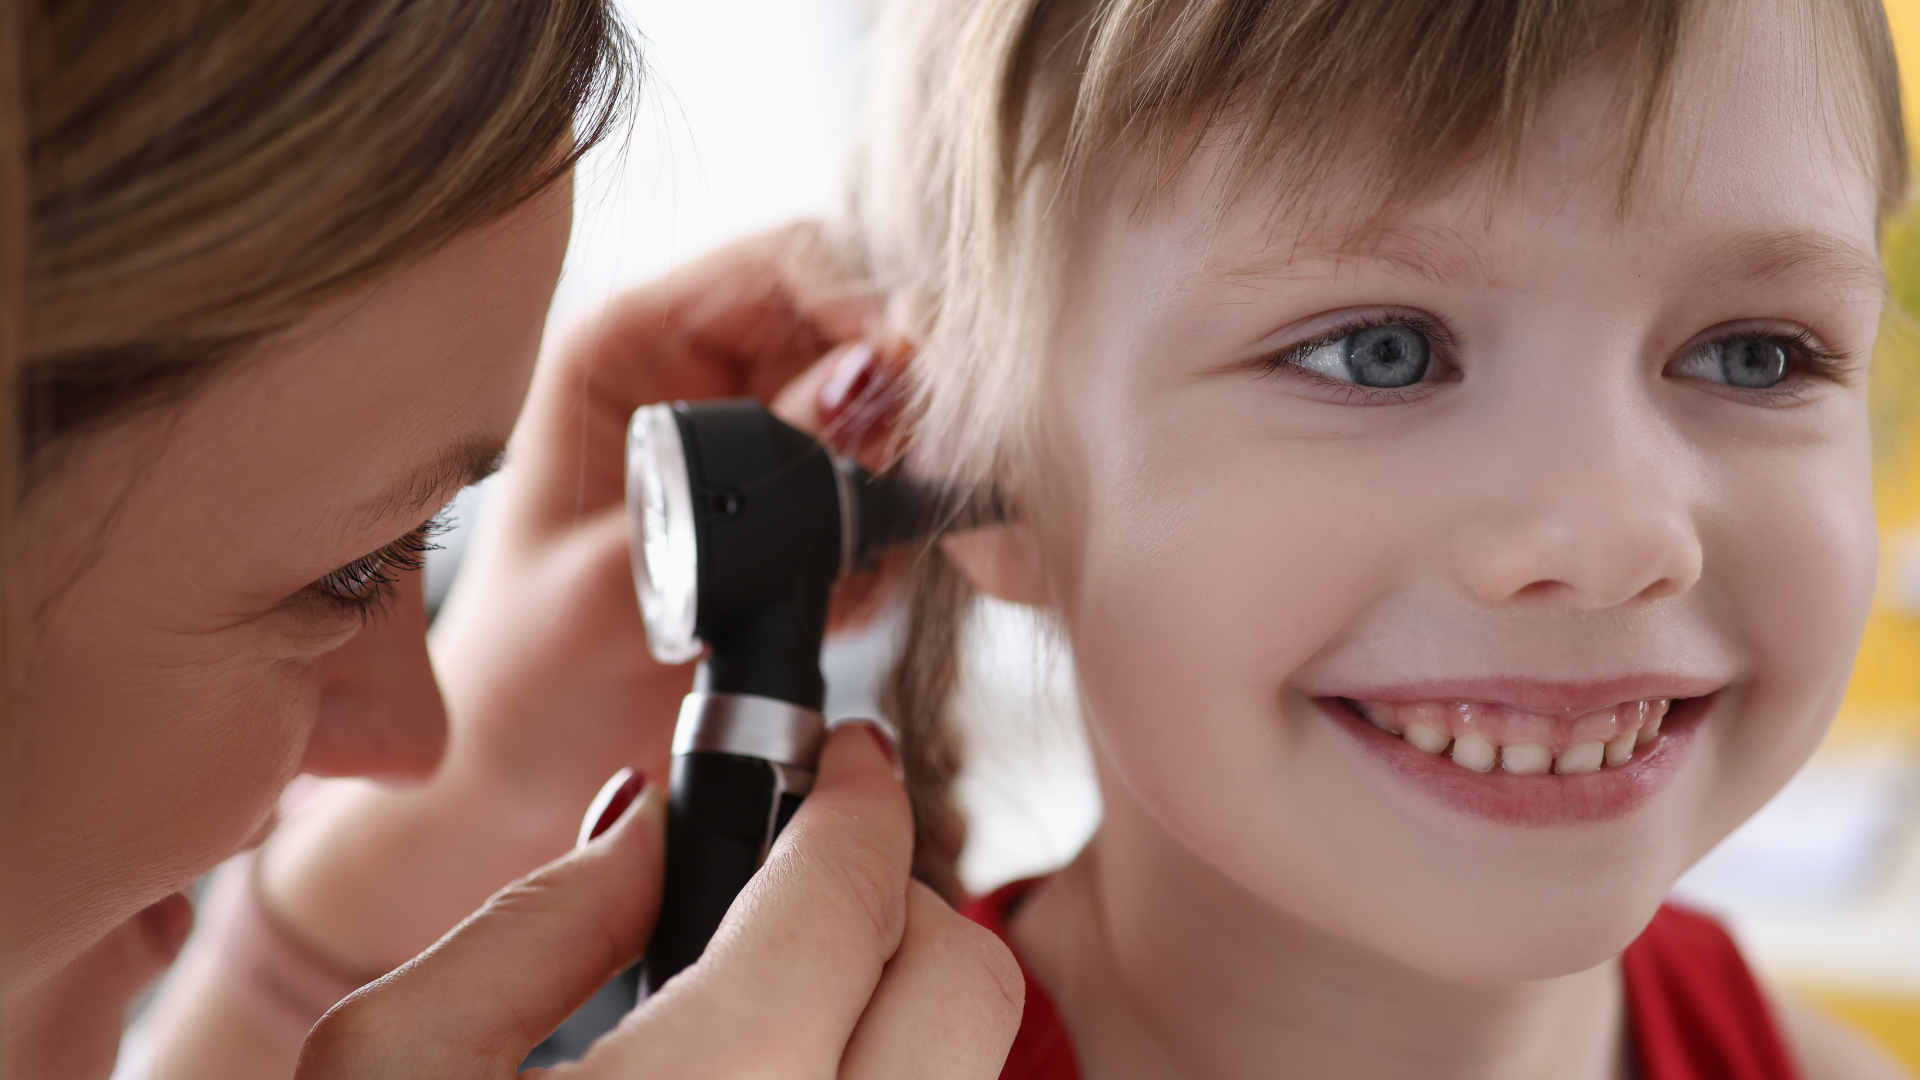 Treating a Child’s Ear Infection (and When to Call the Doctor)